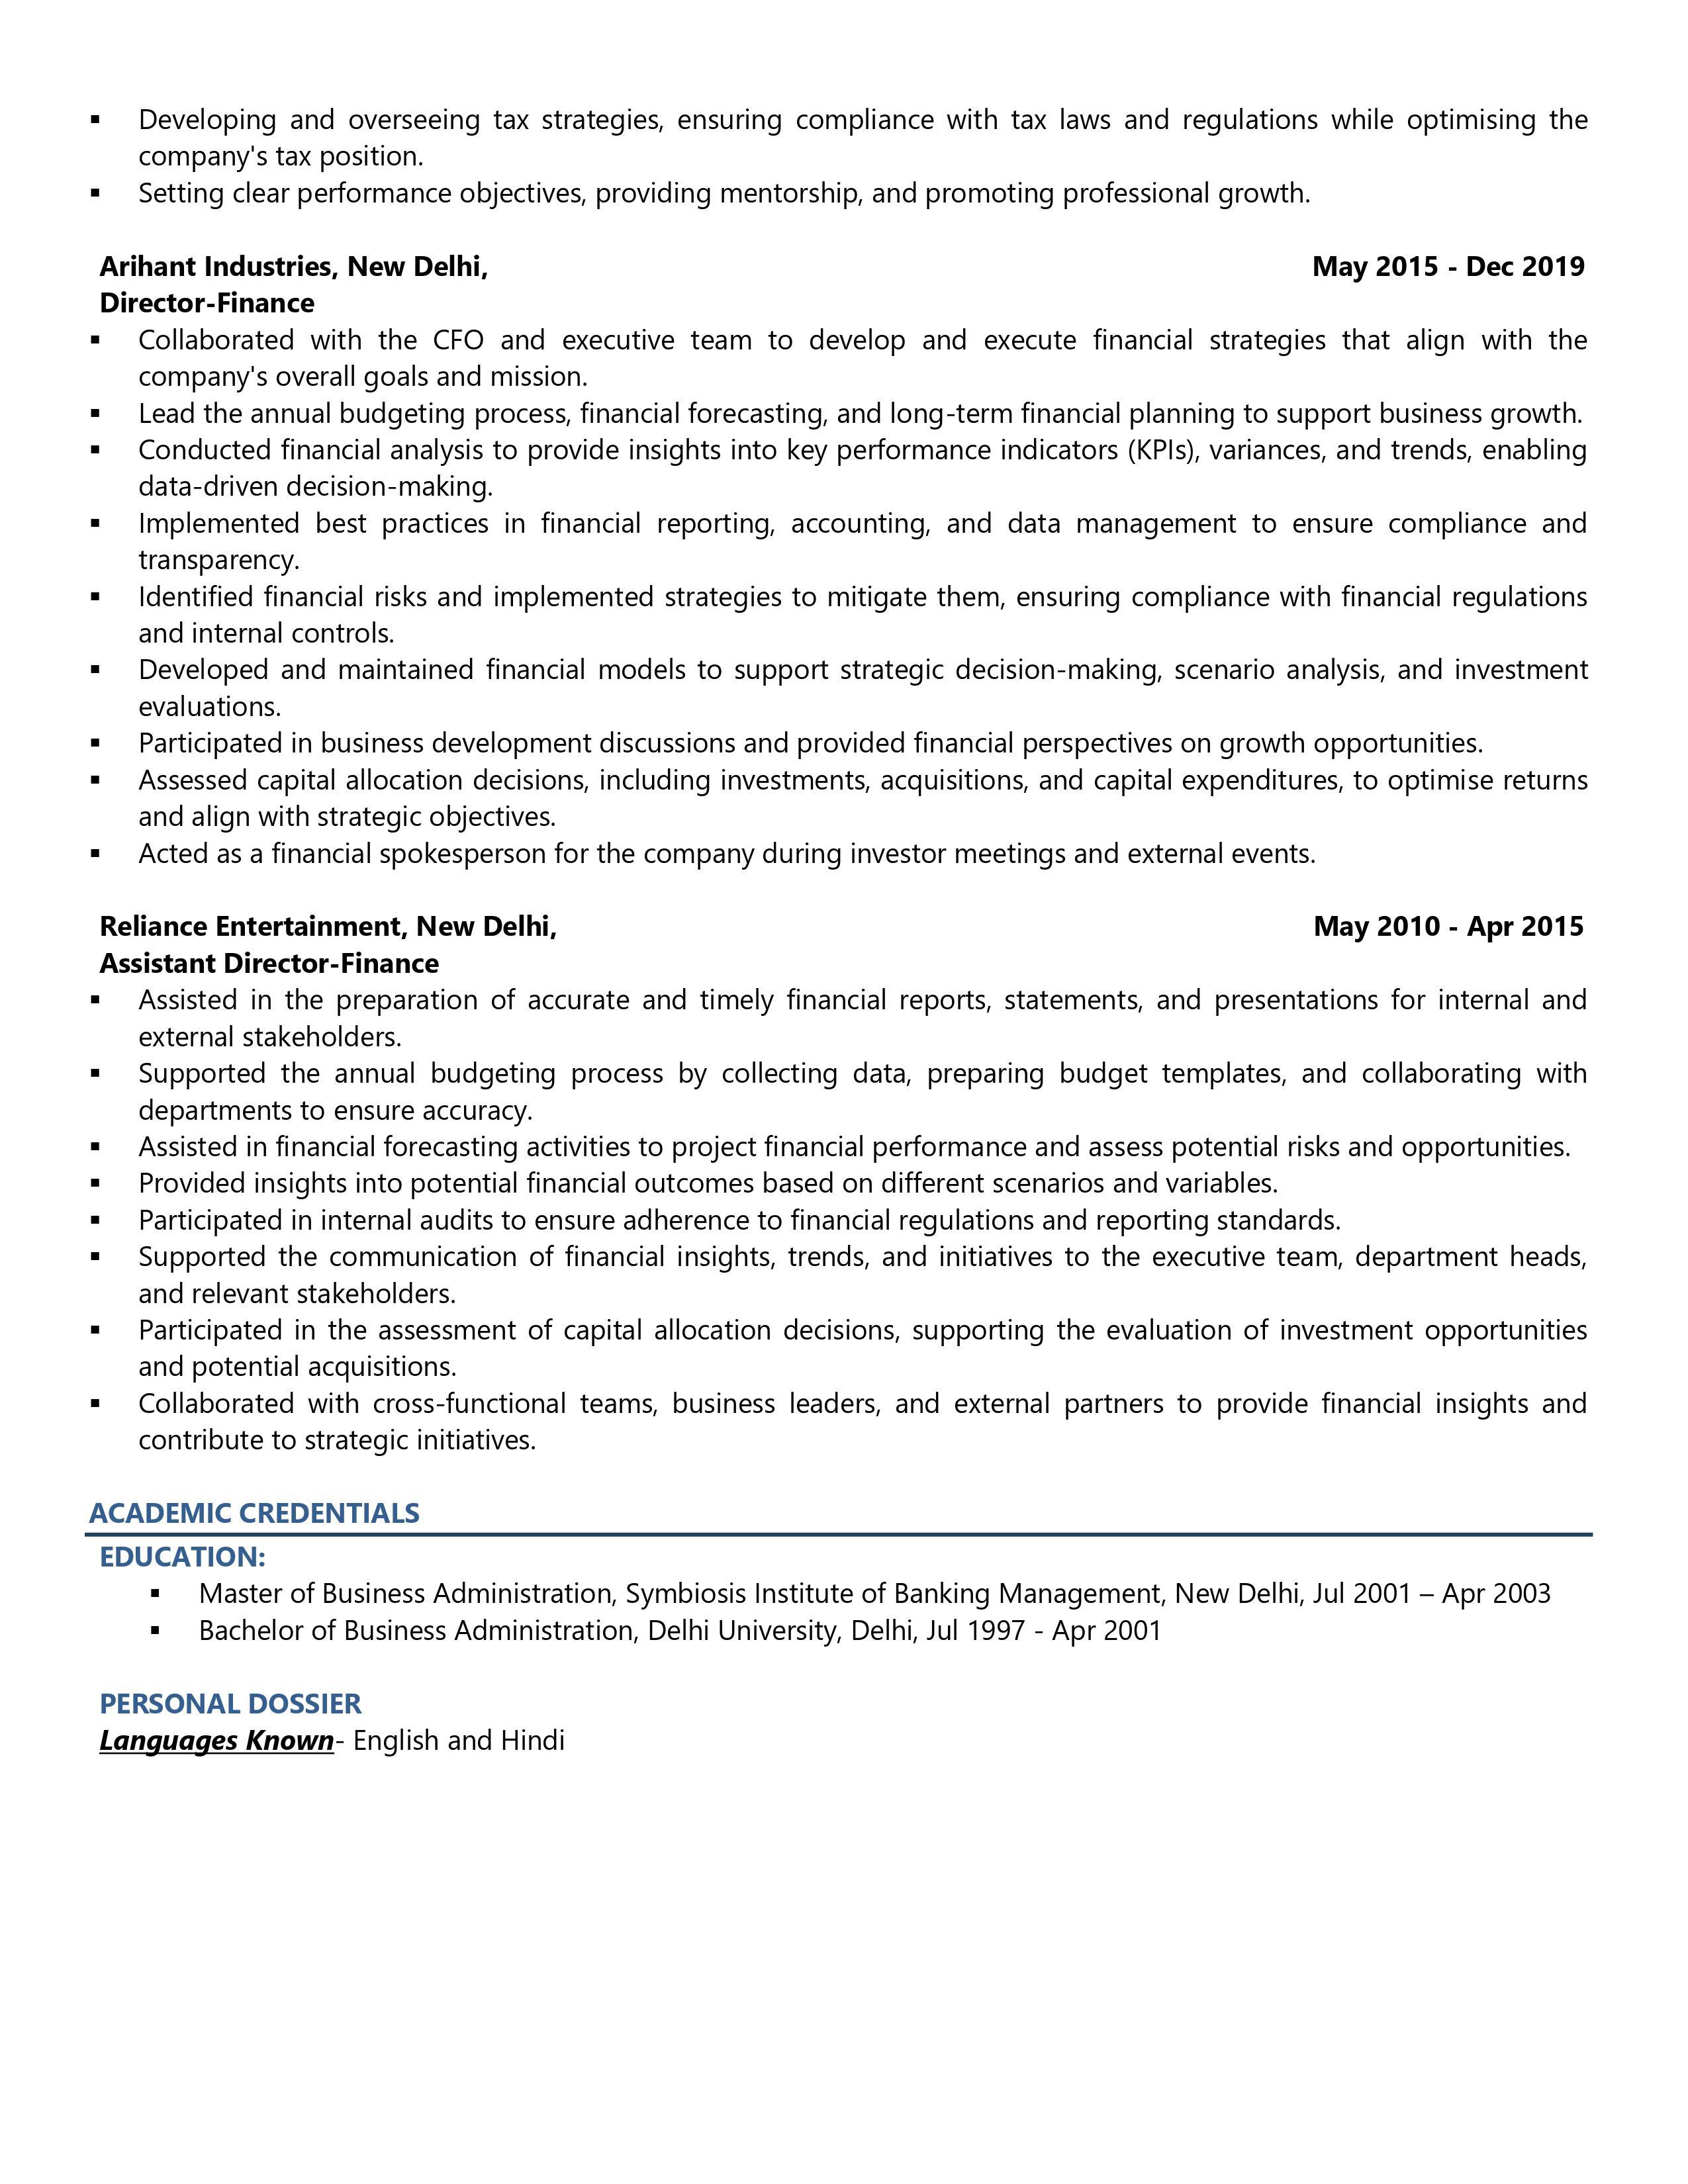 Chief Financial Officer - Resume Example & Template